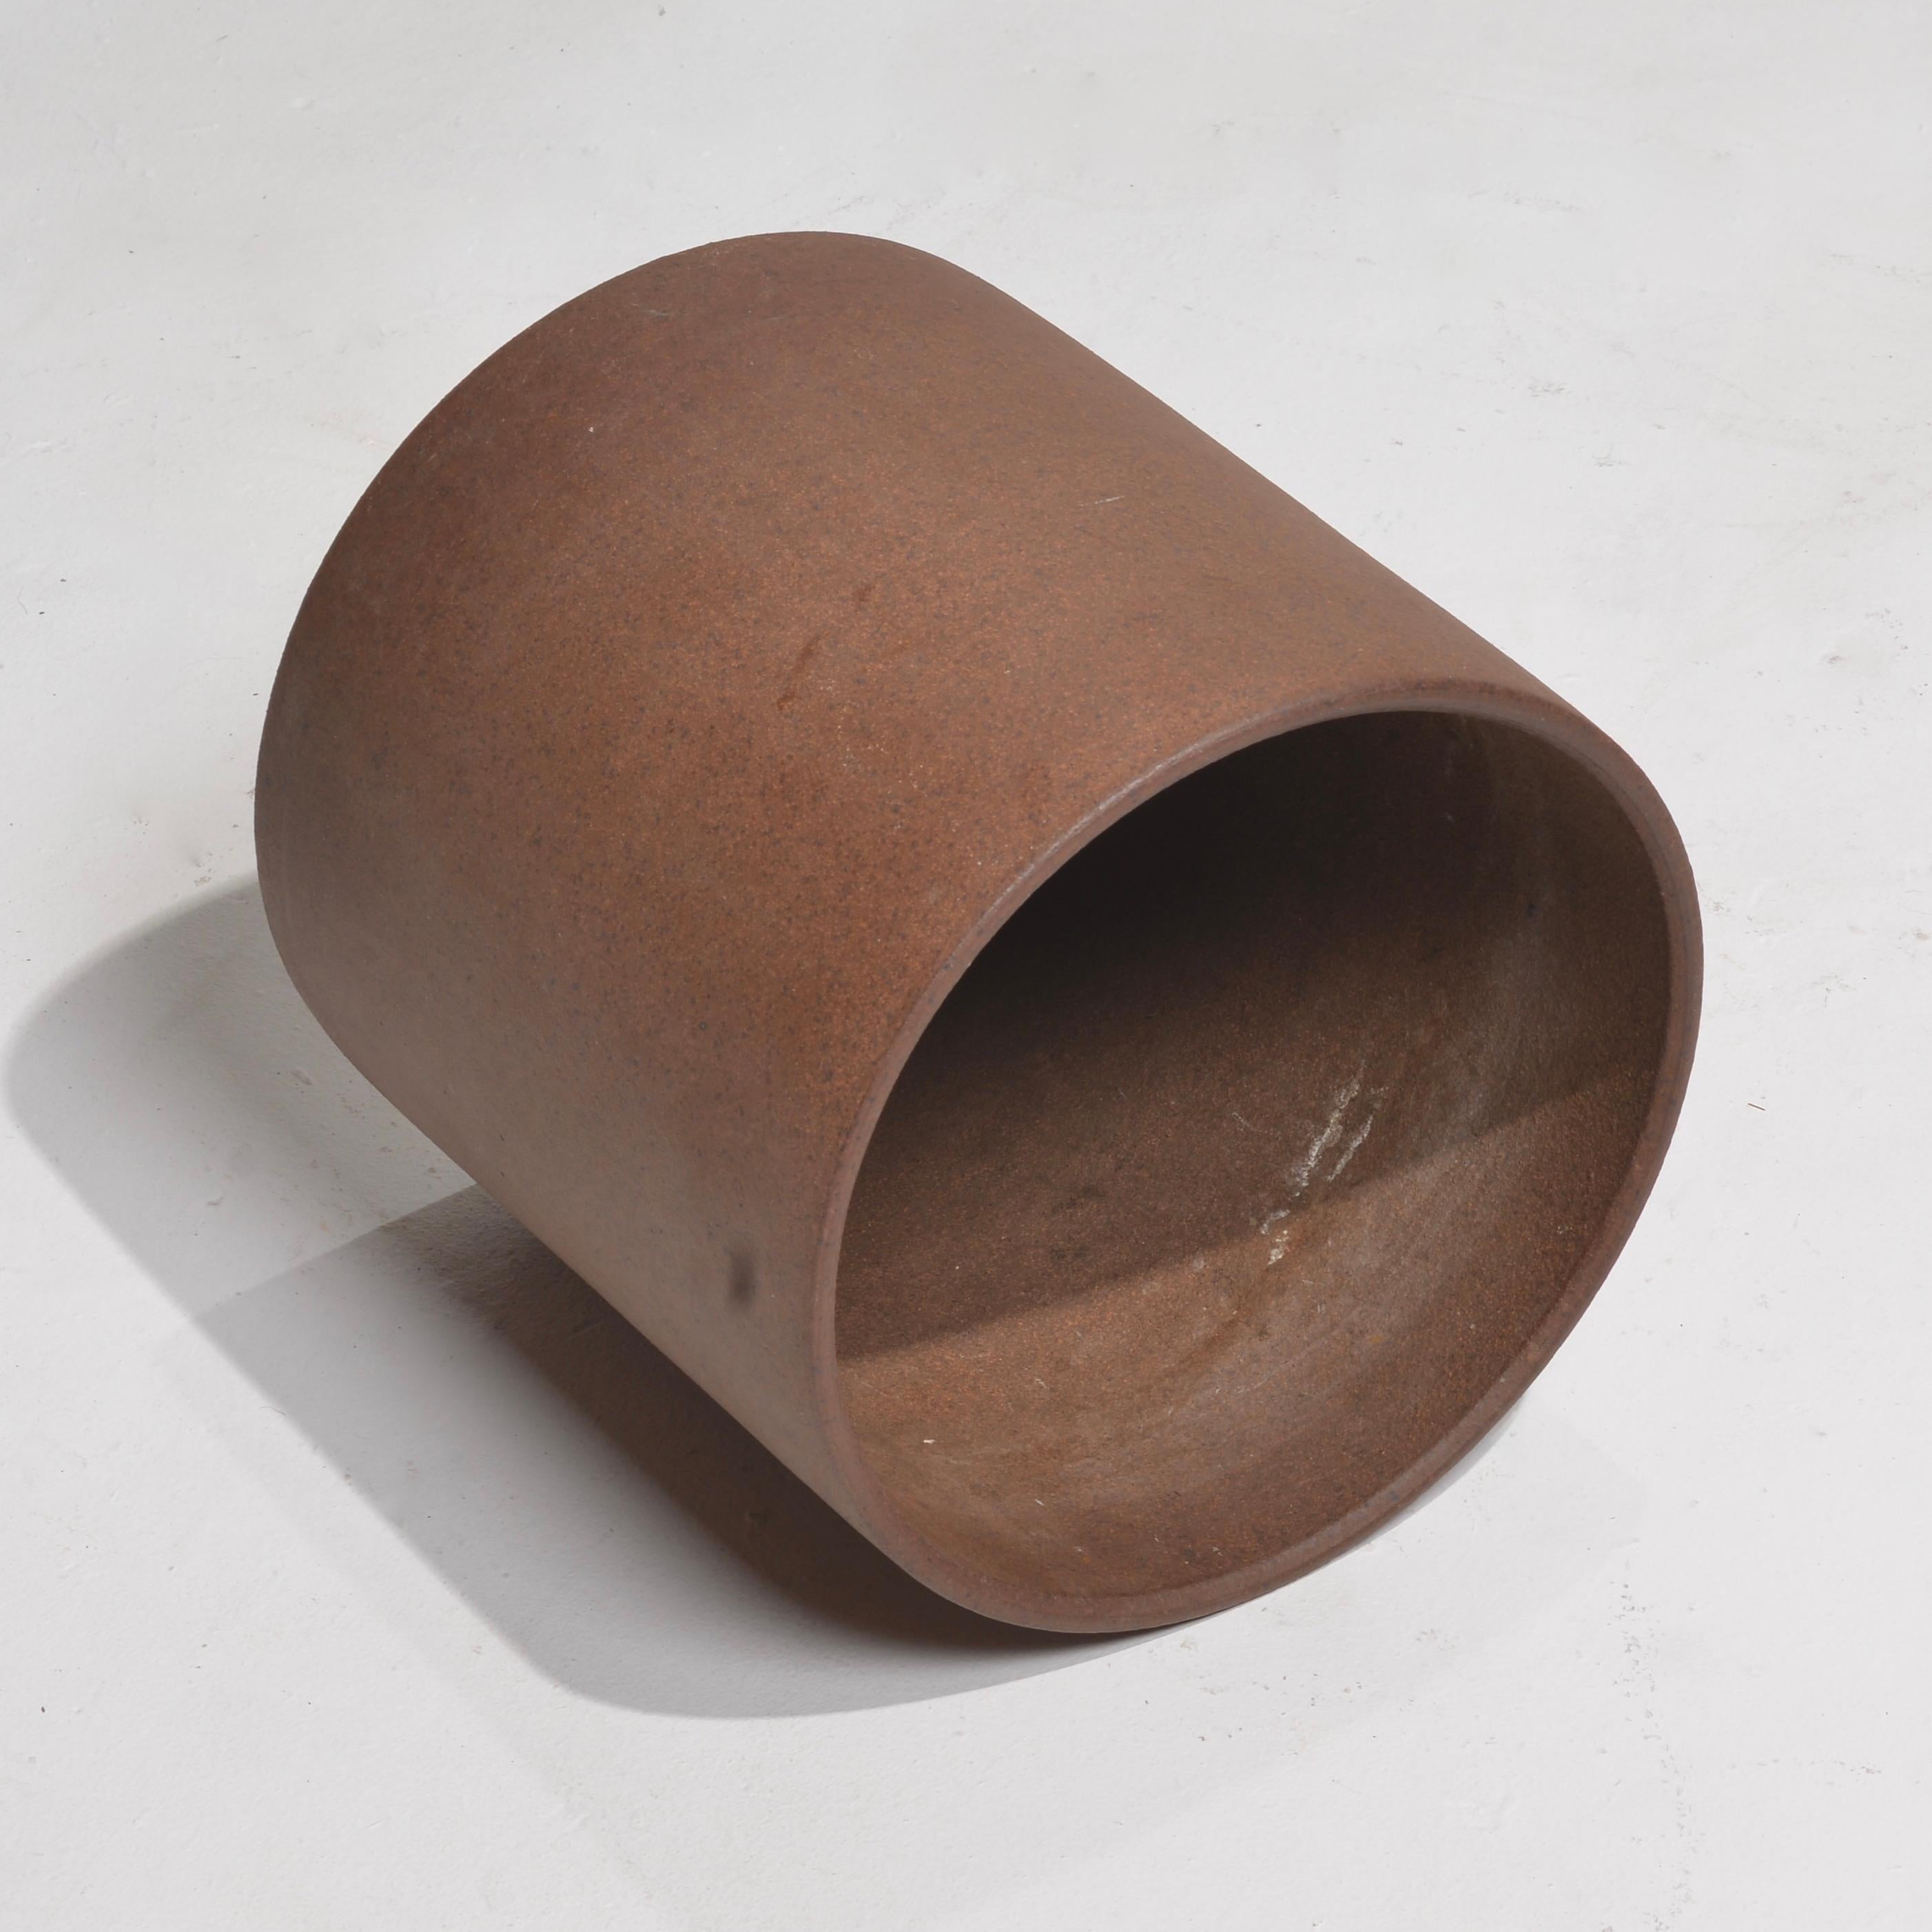 David Cressey Cylindrical Stoneware Planter for Architectural Pottery For Sale 4